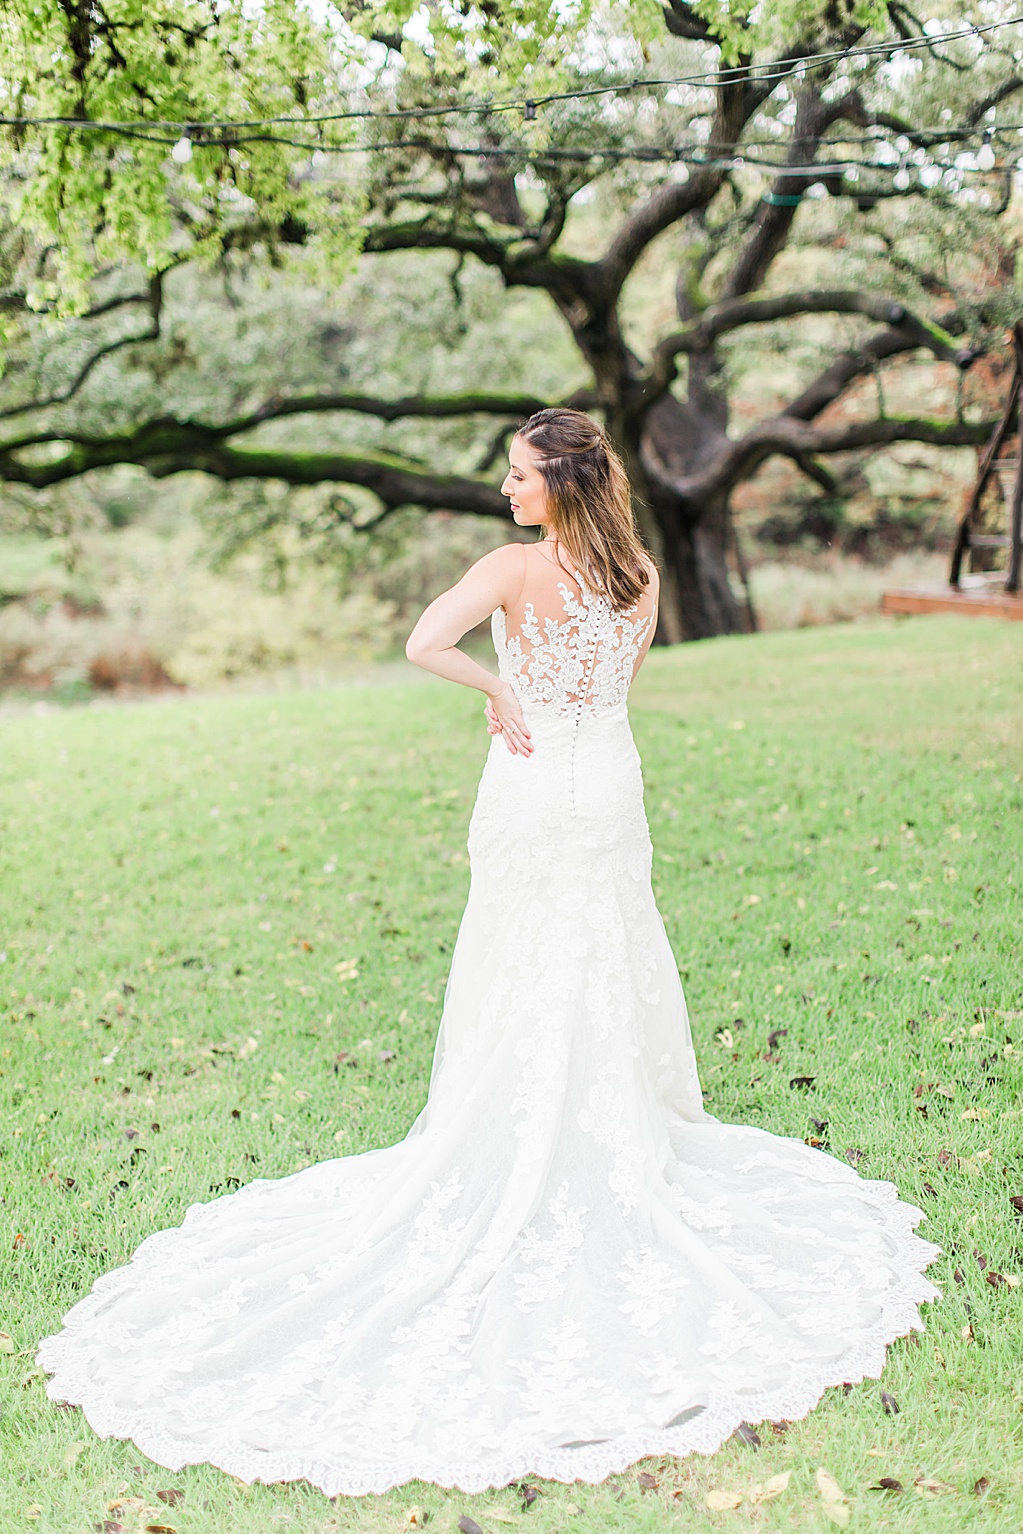 Rainy day bridal session at sisterdale dancehall in boerne texas 0009